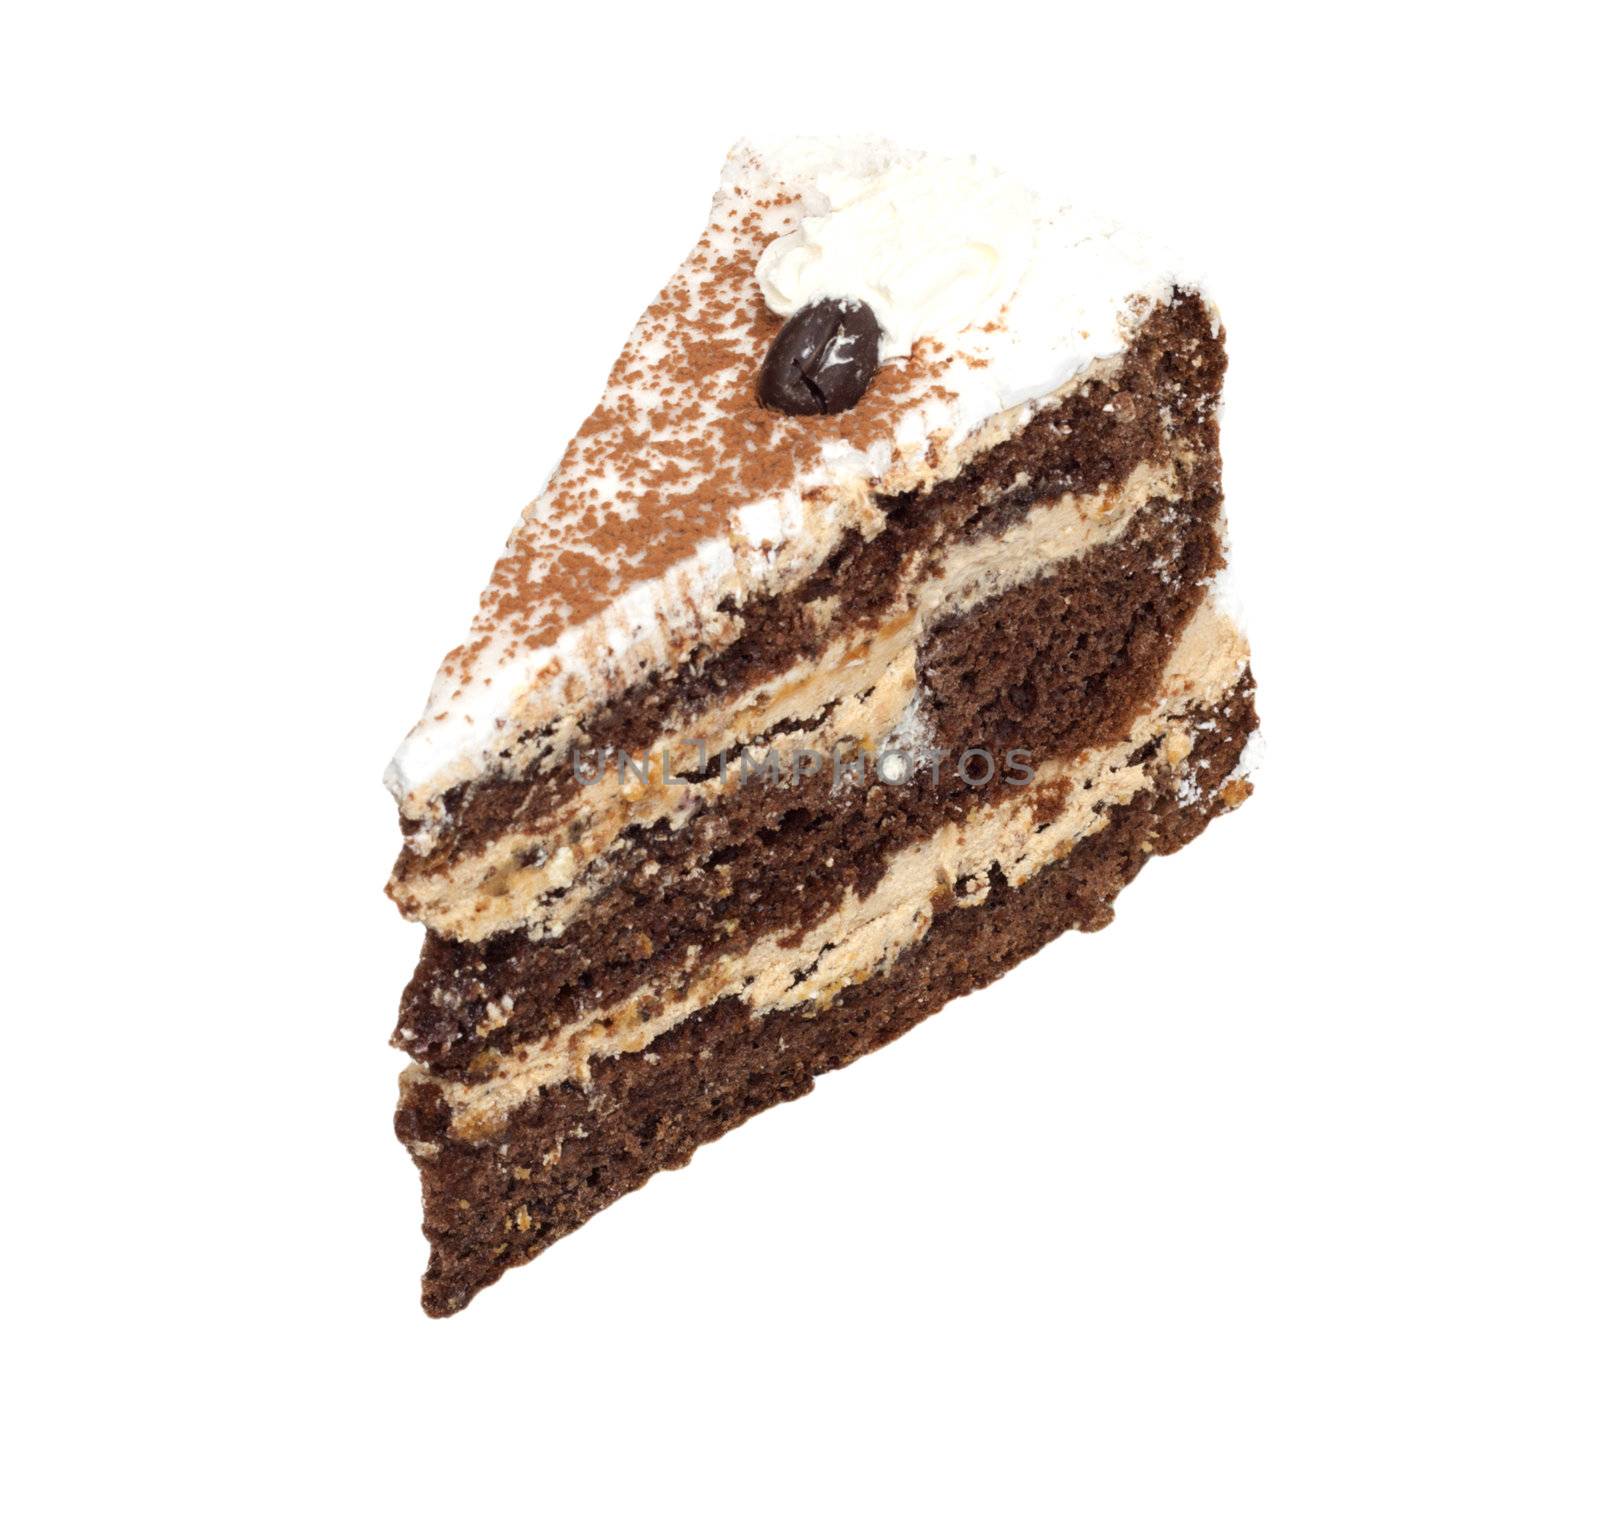 Sweet and tasty brownie cake great for during coffee brake  by schankz